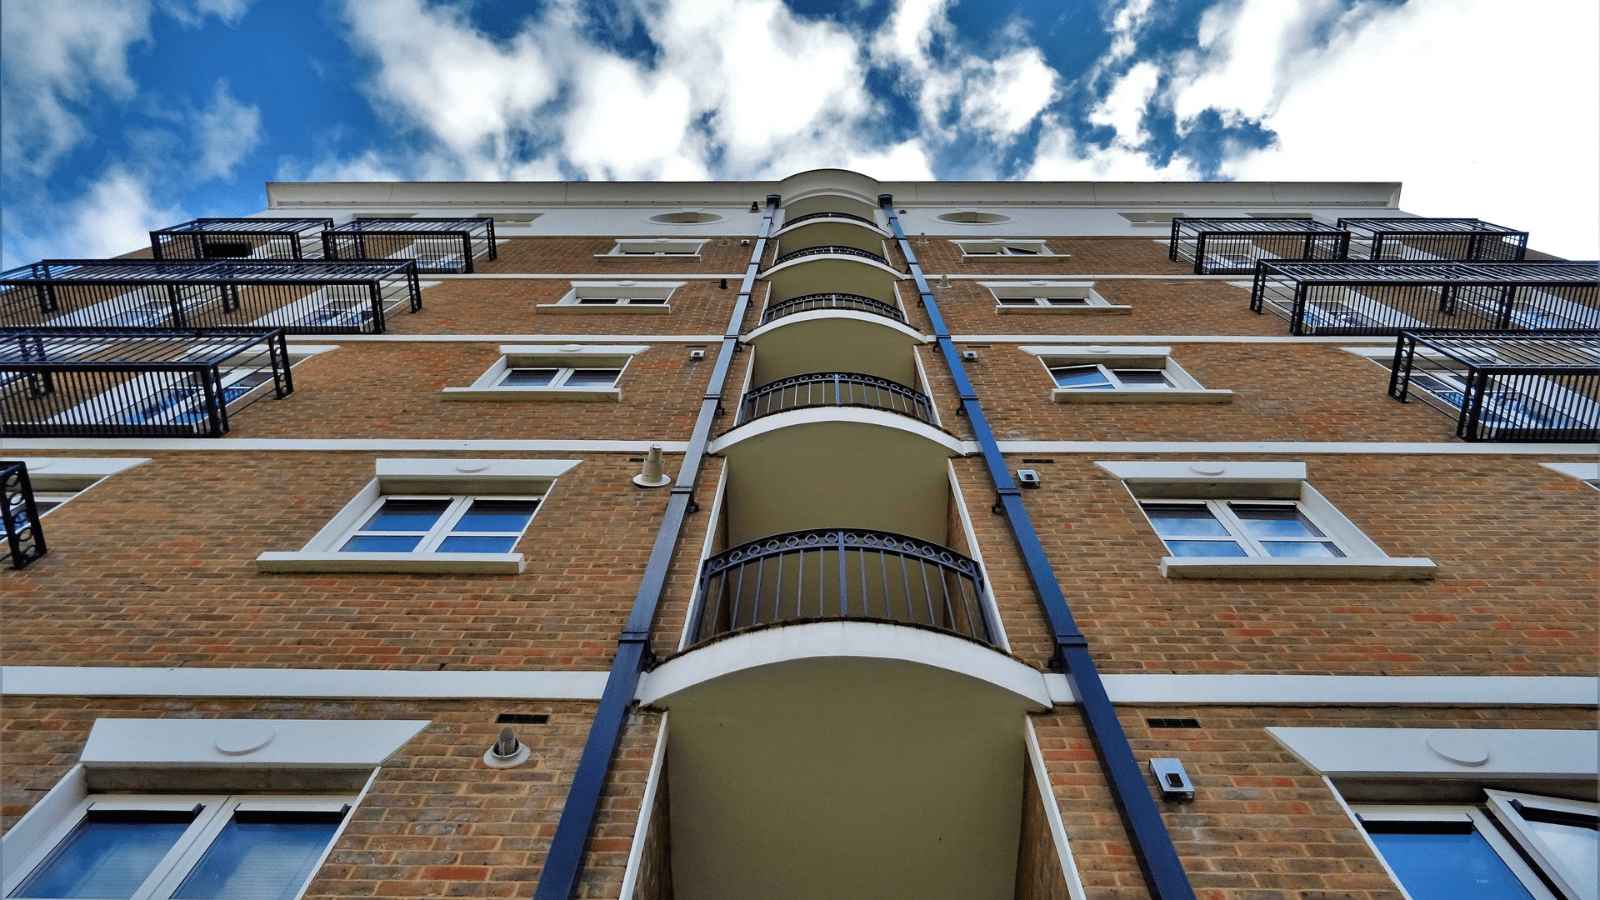 Looking up at a block of flats with blue sky and white clouds